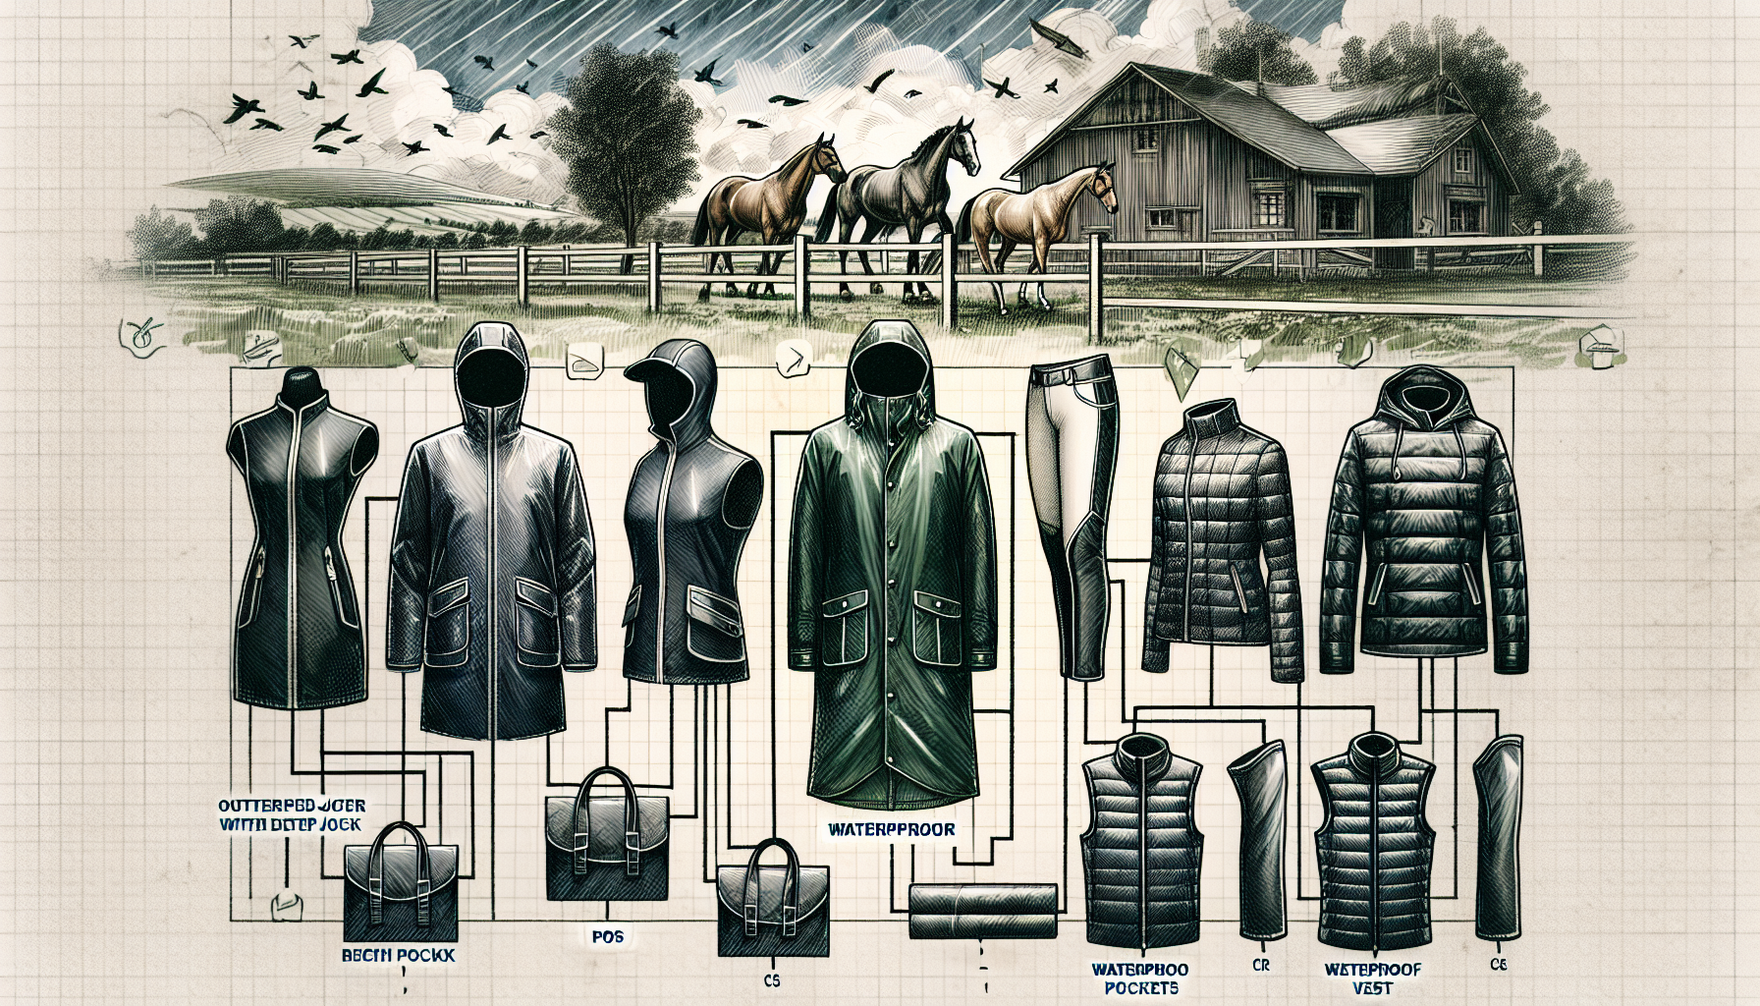 Envision an educational image that showcases a variety of waterproof outerwear options for horse riders of various descent and genders. There should be distinct sections devoted to each option like a 